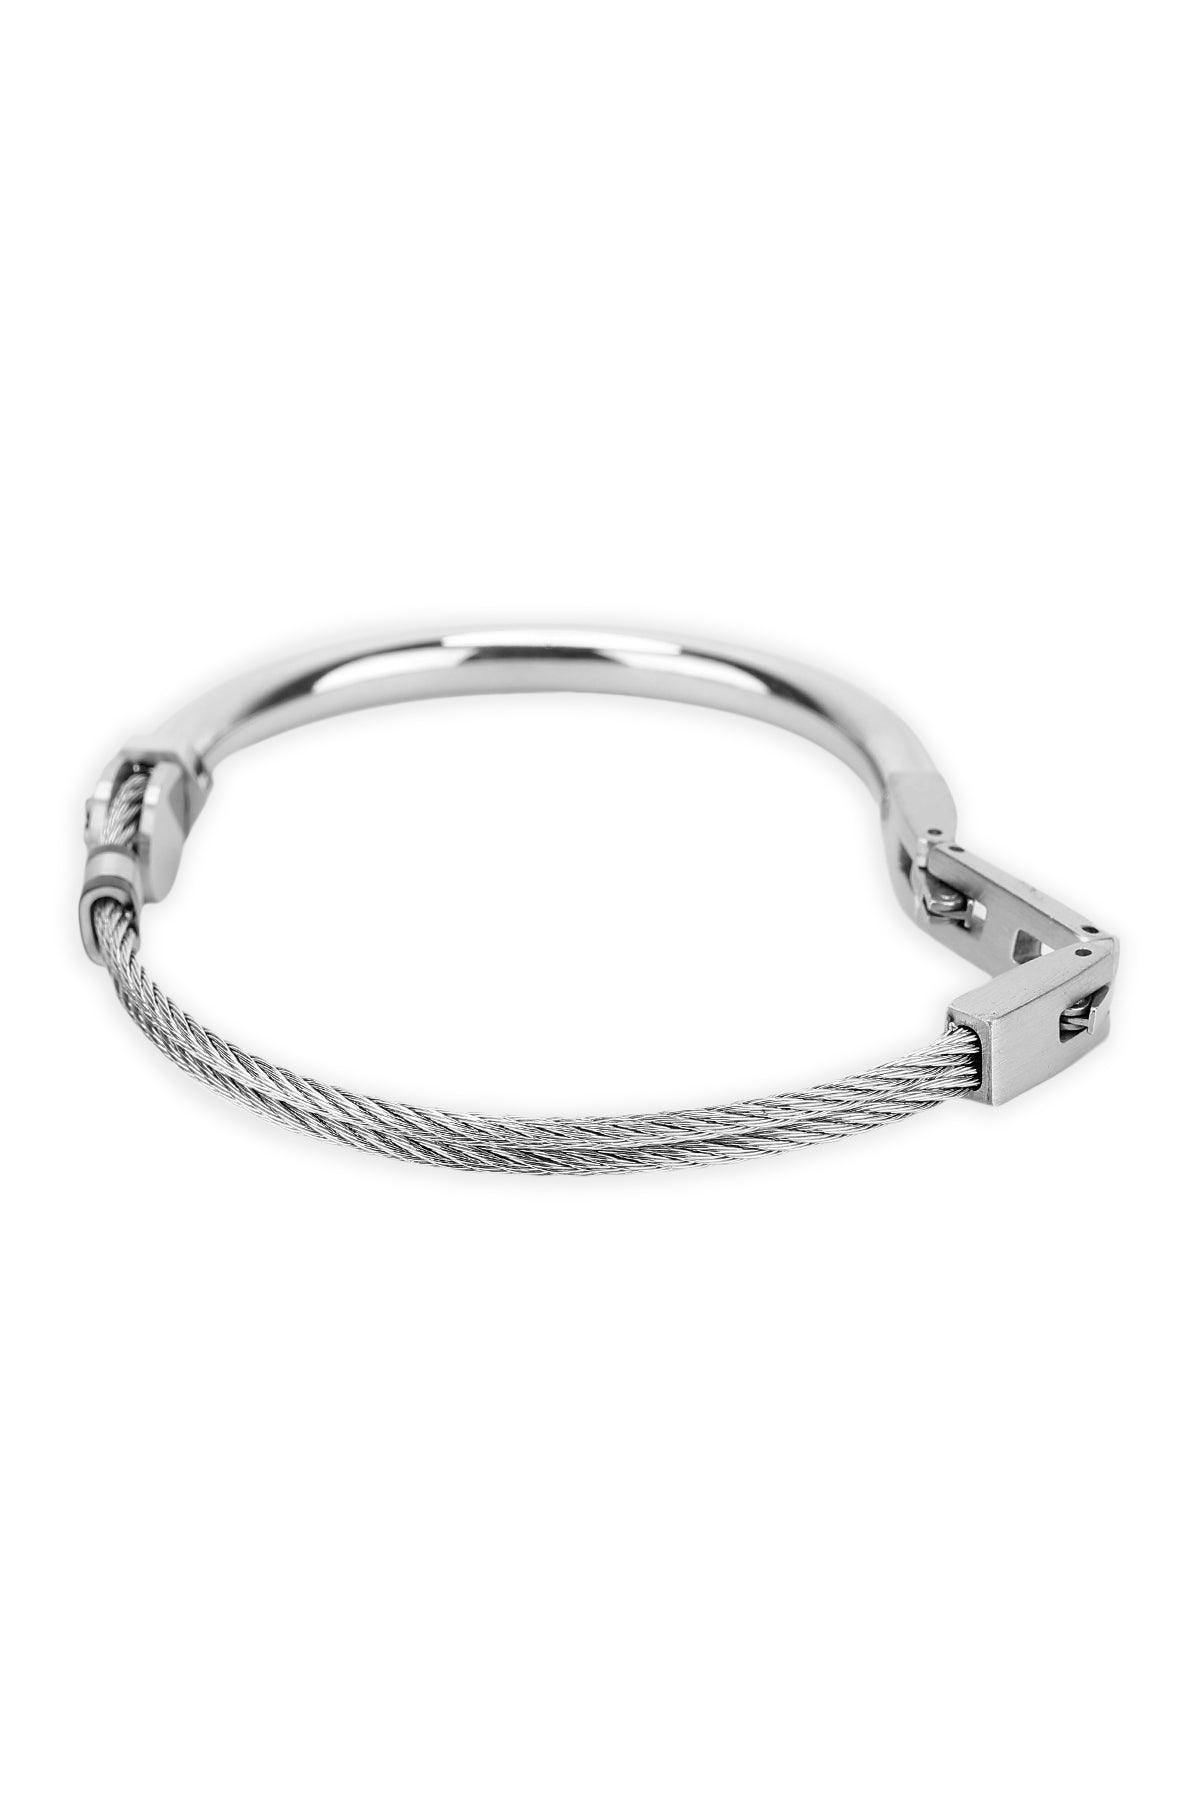 Cube Bracelet for Men, Stainless Steel Cube Wire Bracelet, 3 Colors |  Panthera Lux